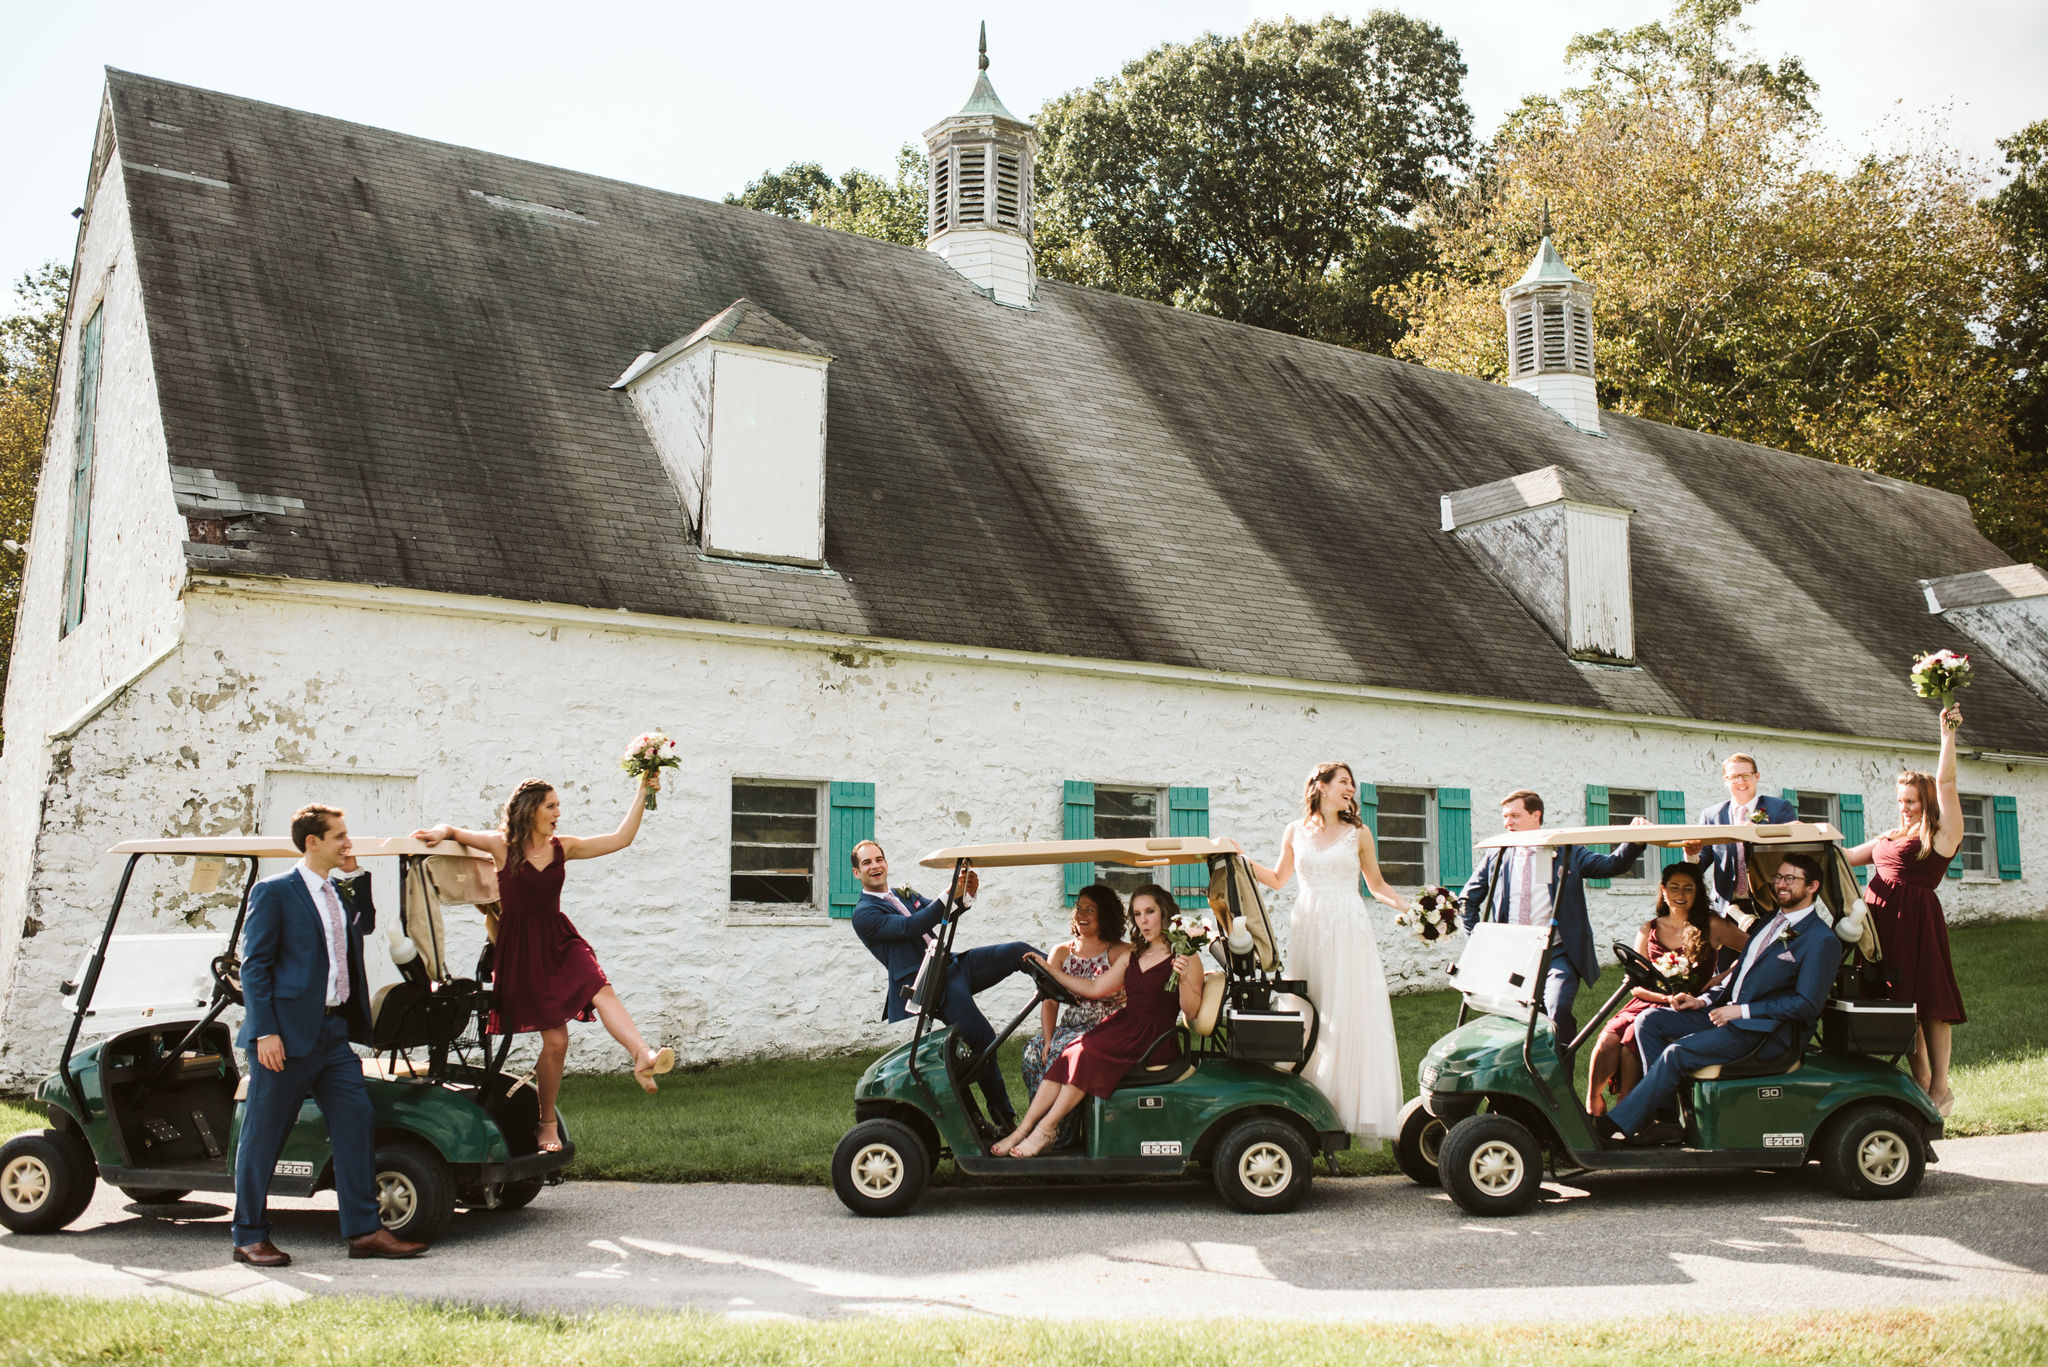  Phoenix Maryland, Baltimore Wedding Photographer, Eagle’s Nest Country Club, Classic, Romantic, Fun Photo of Bridal Party on Golf Carts Outside Barn, Silly Portrait, Burgundy Brideside Bridesmaid Dresses 